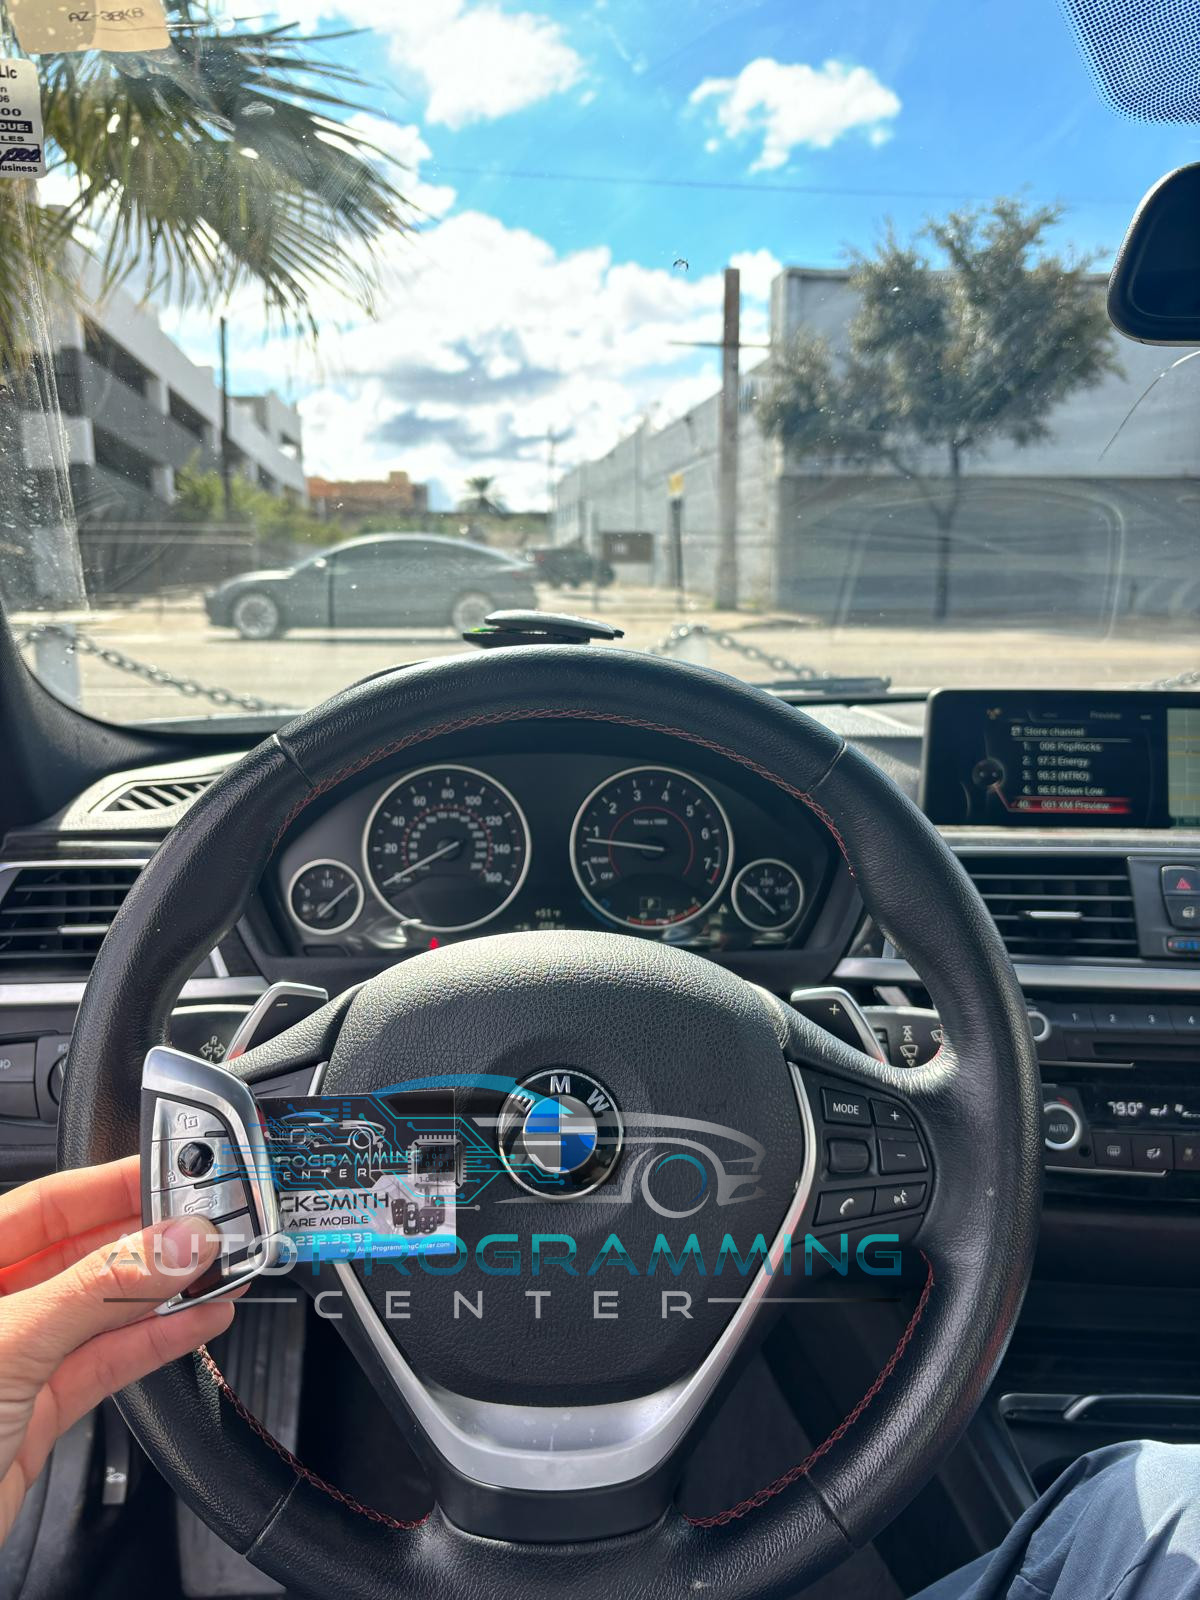 High-quality image showcasing the sleek and sophisticated design of a BMW key fob, reflecting luxury and advanced technology for seamless vehicle access.